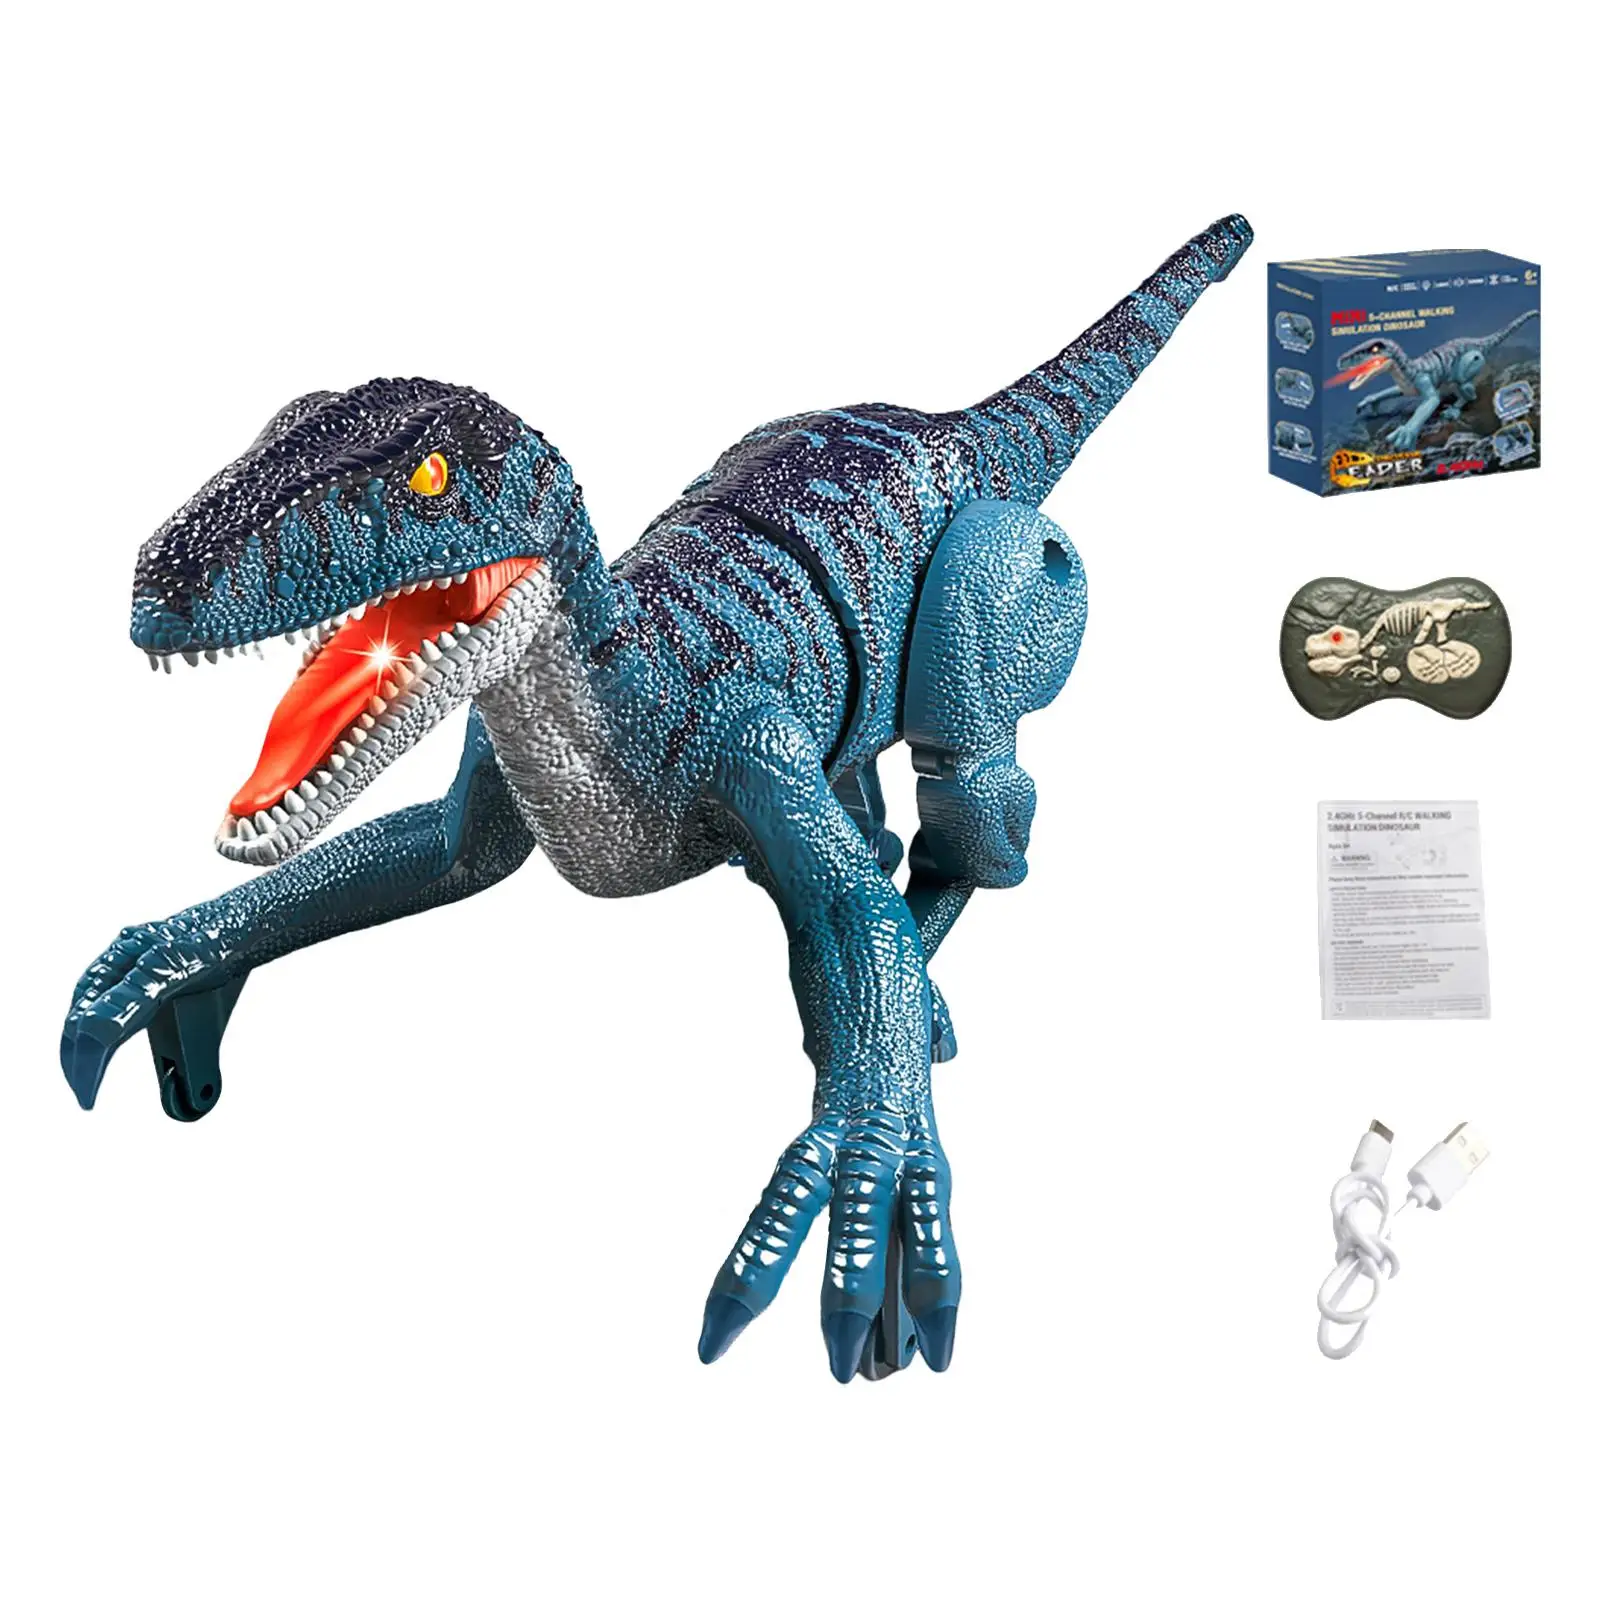 RC Dinosaur Toy Educational Toy Realistic Play Dinosaur Toy Electric Dinosaur Toys for Children Kids Girls Boys Holiday Gifts